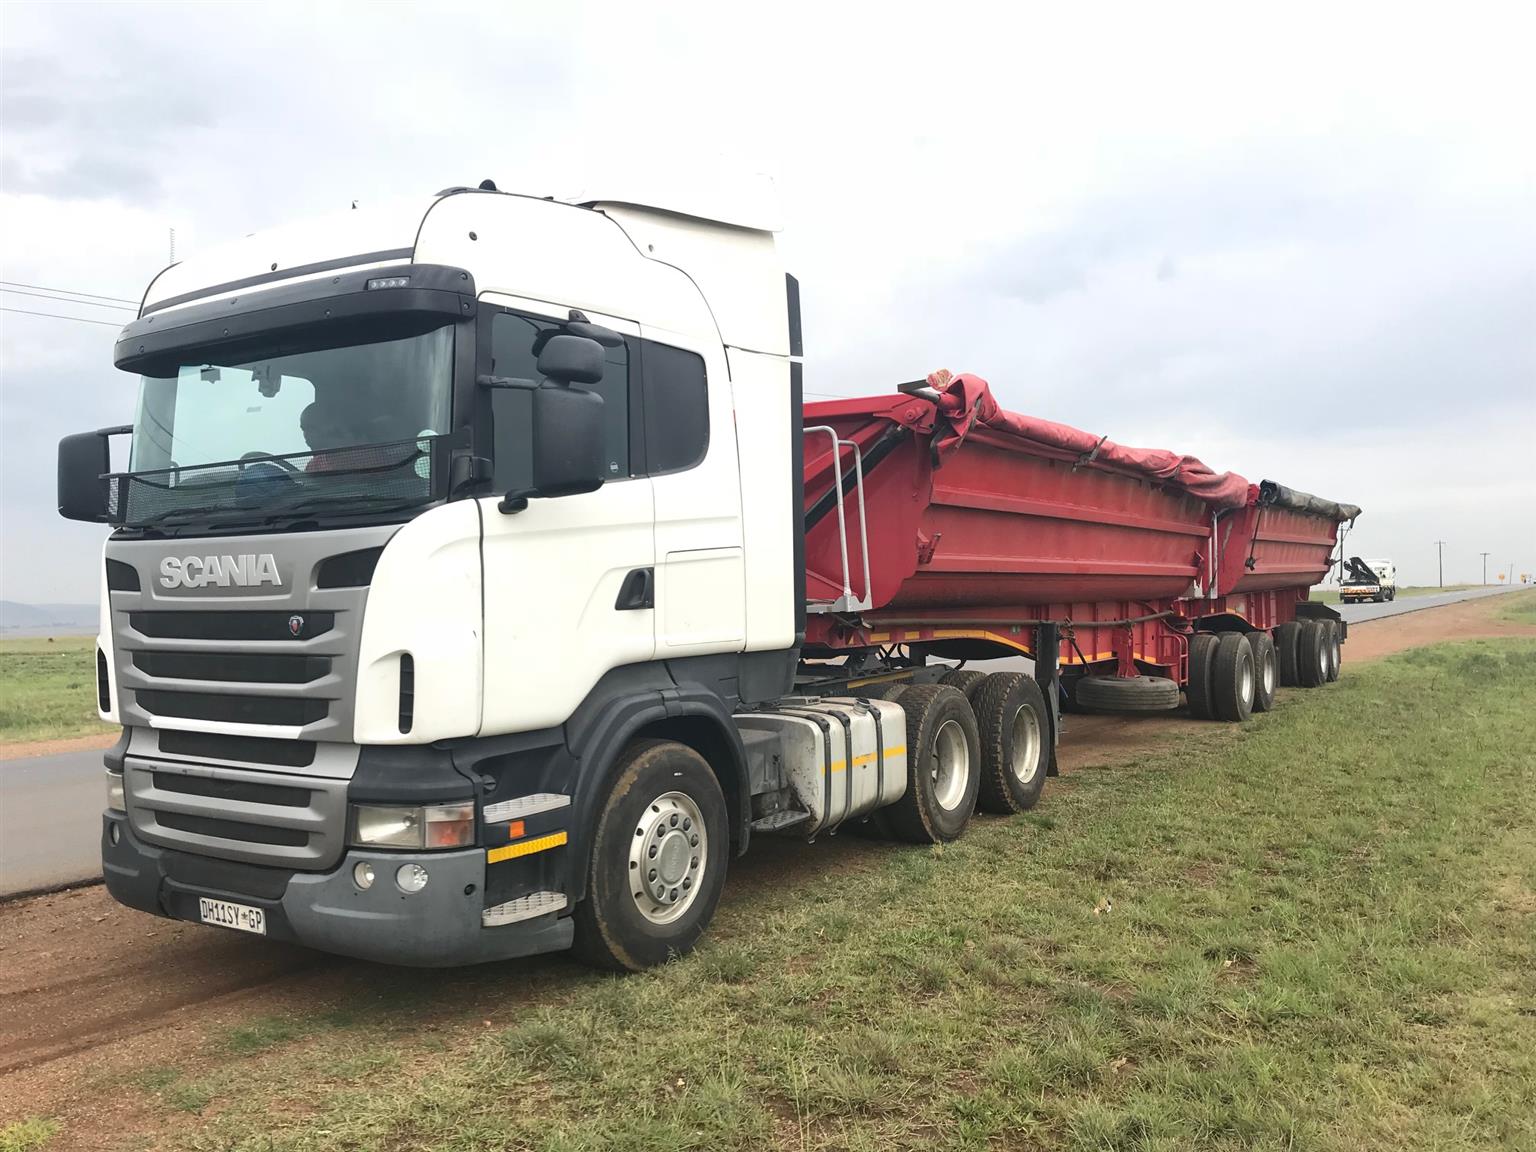 Start Your Own Trucking Business, 34 Ton Side Tippers, Become A Trucker In Namibia, South West Africa